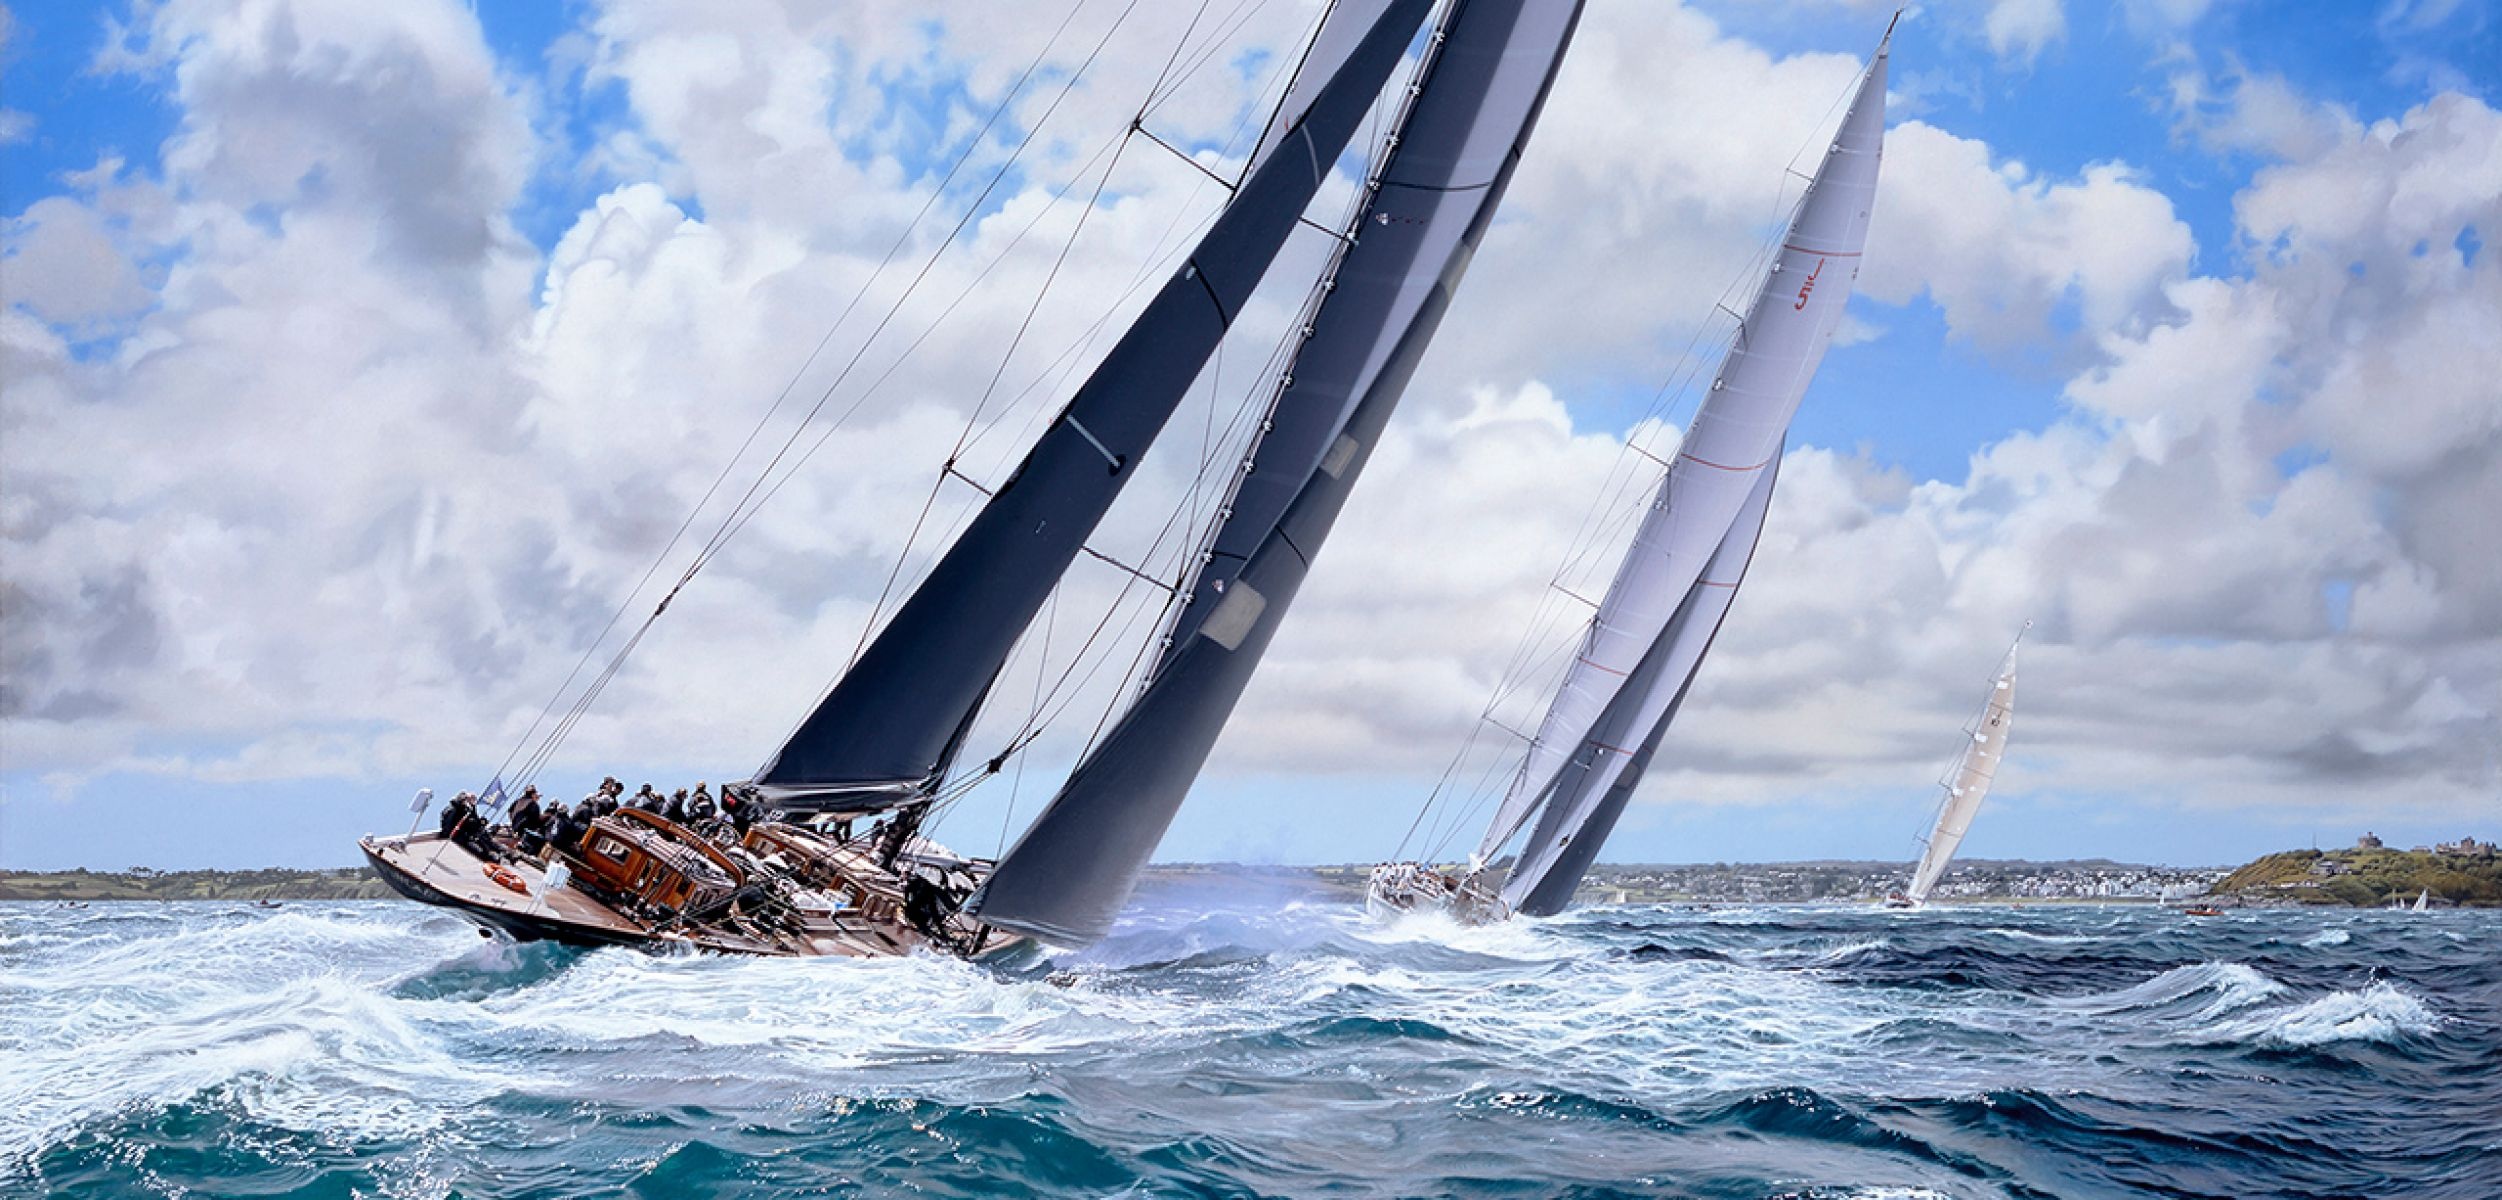 Yacht Racing: J Class yacht tournament, A sport in which sailboats compete on the water. 2510x1200 Dual Screen Wallpaper.